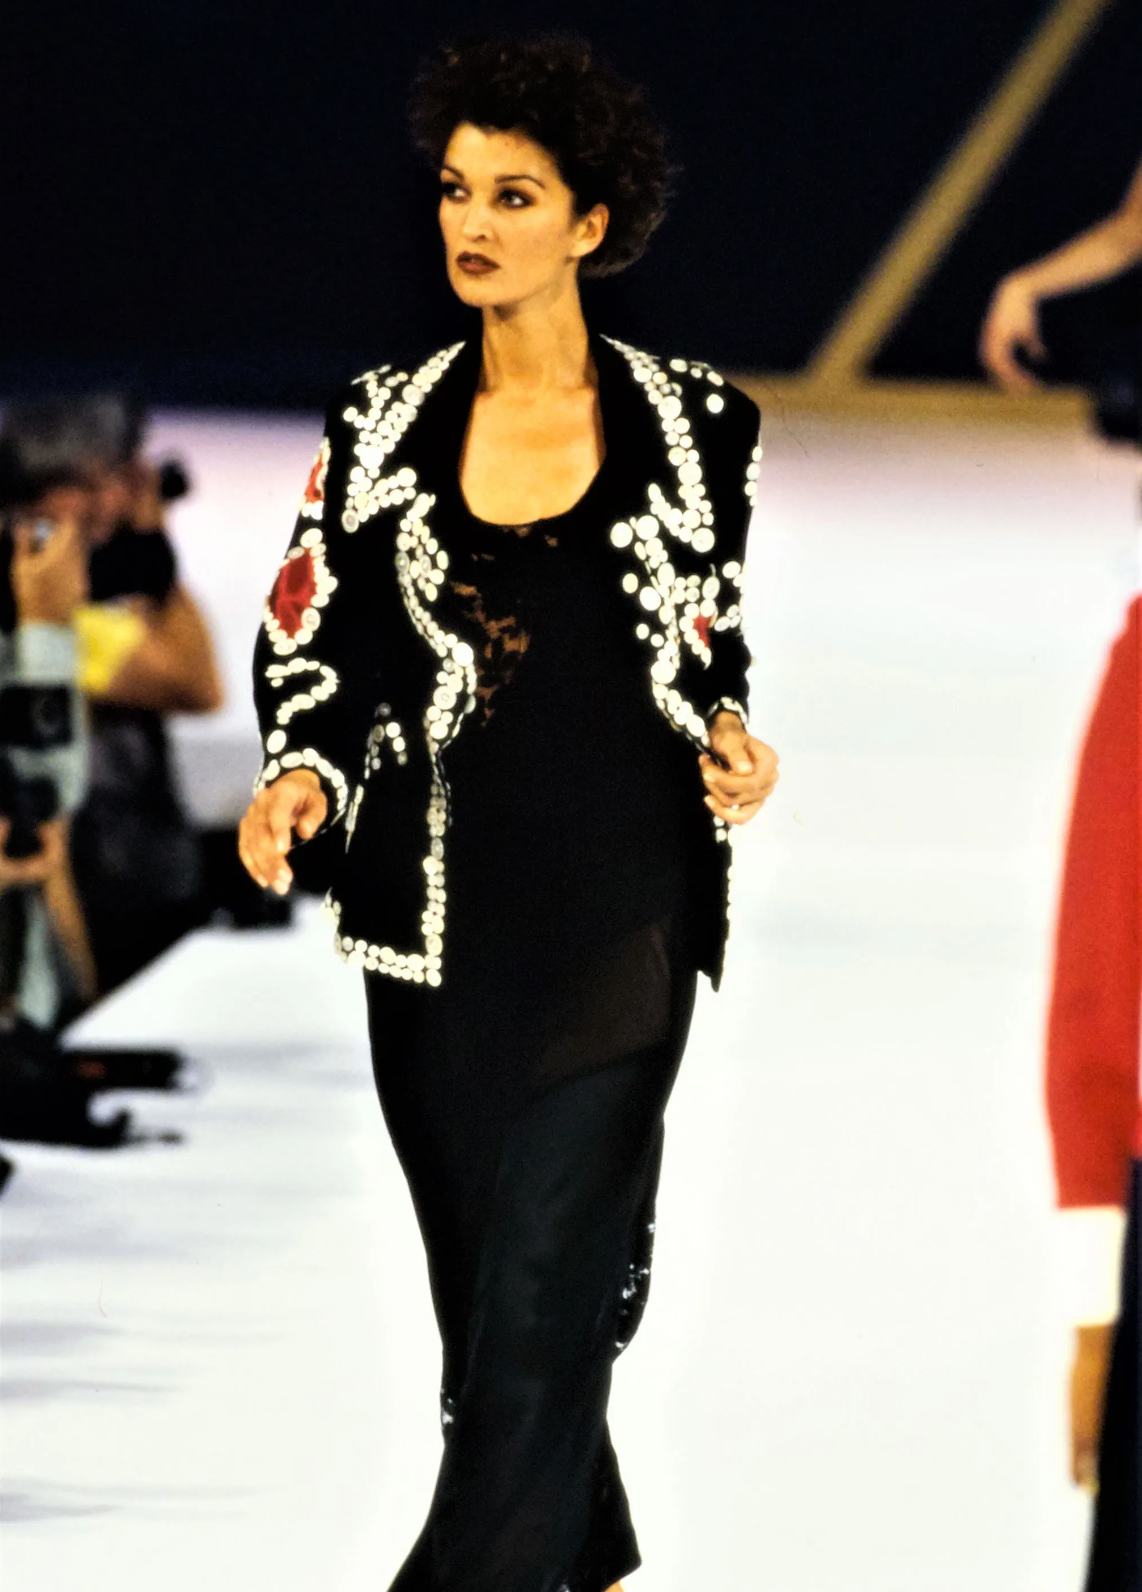 Vintage Moschino Mother of Pearl Button Blazer front view on model on runway from Vogue archives  @Recessla